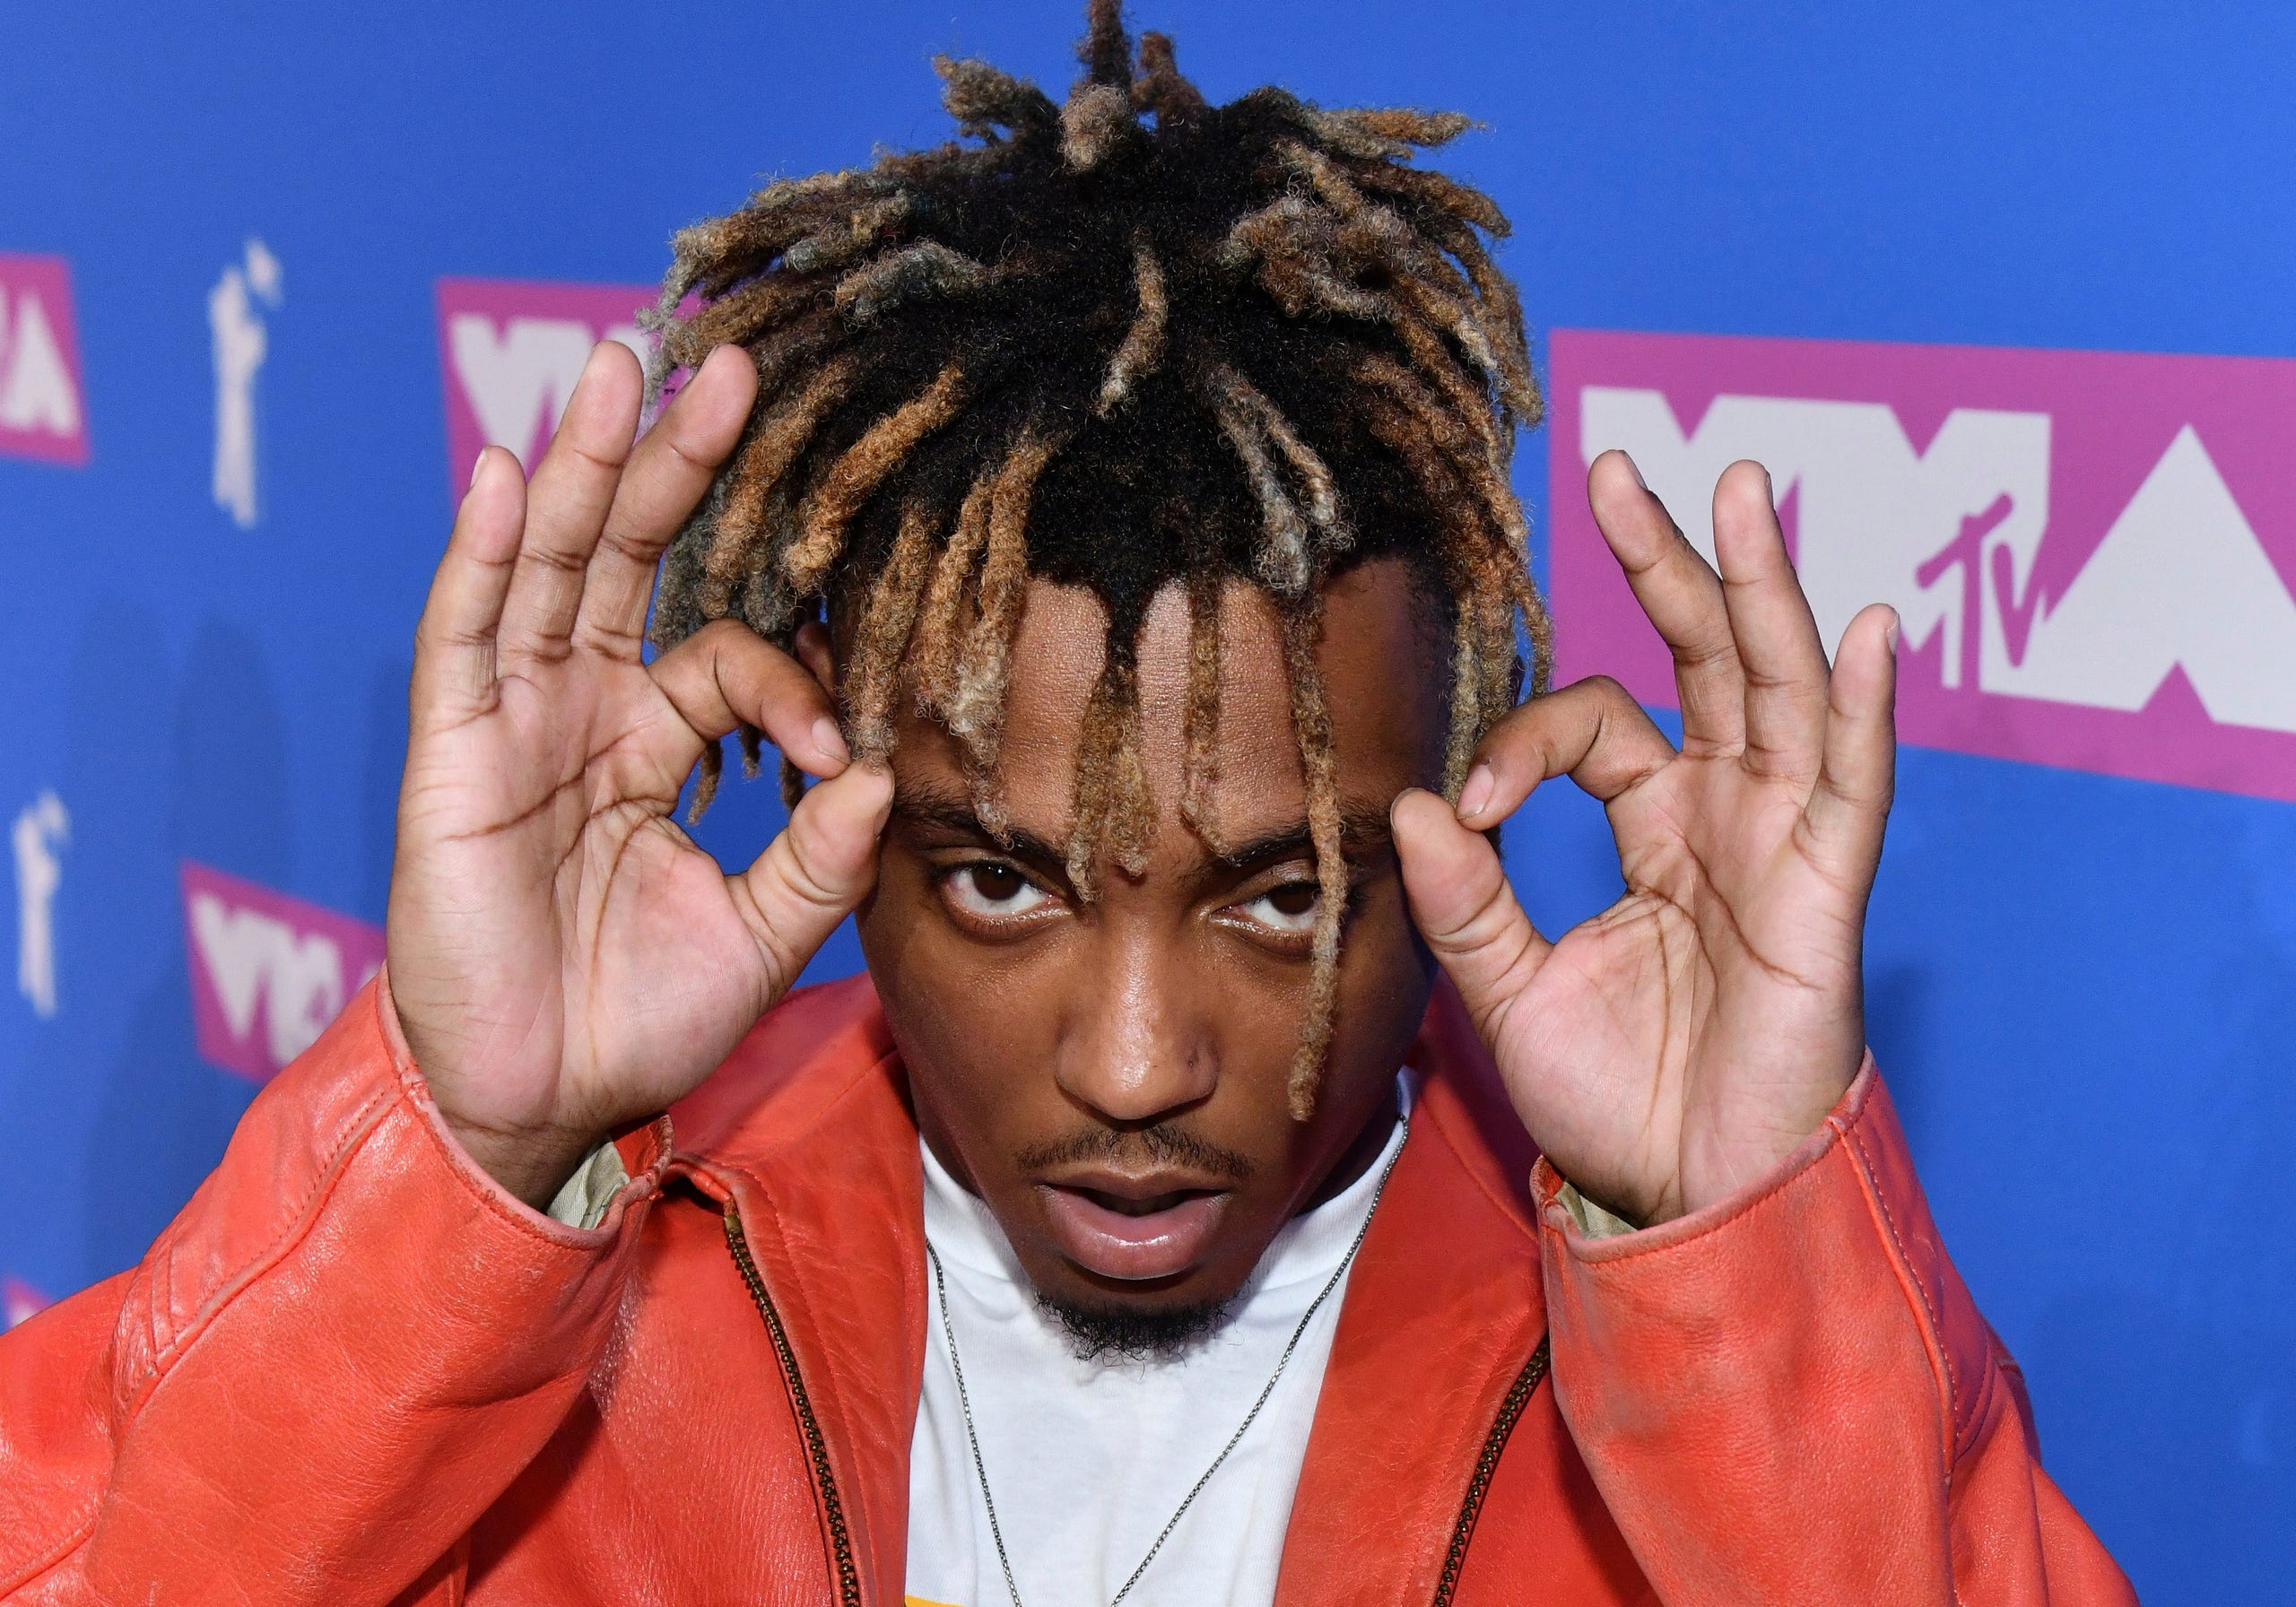 Juice Wrld's death: The Chicago rapper's life in photo